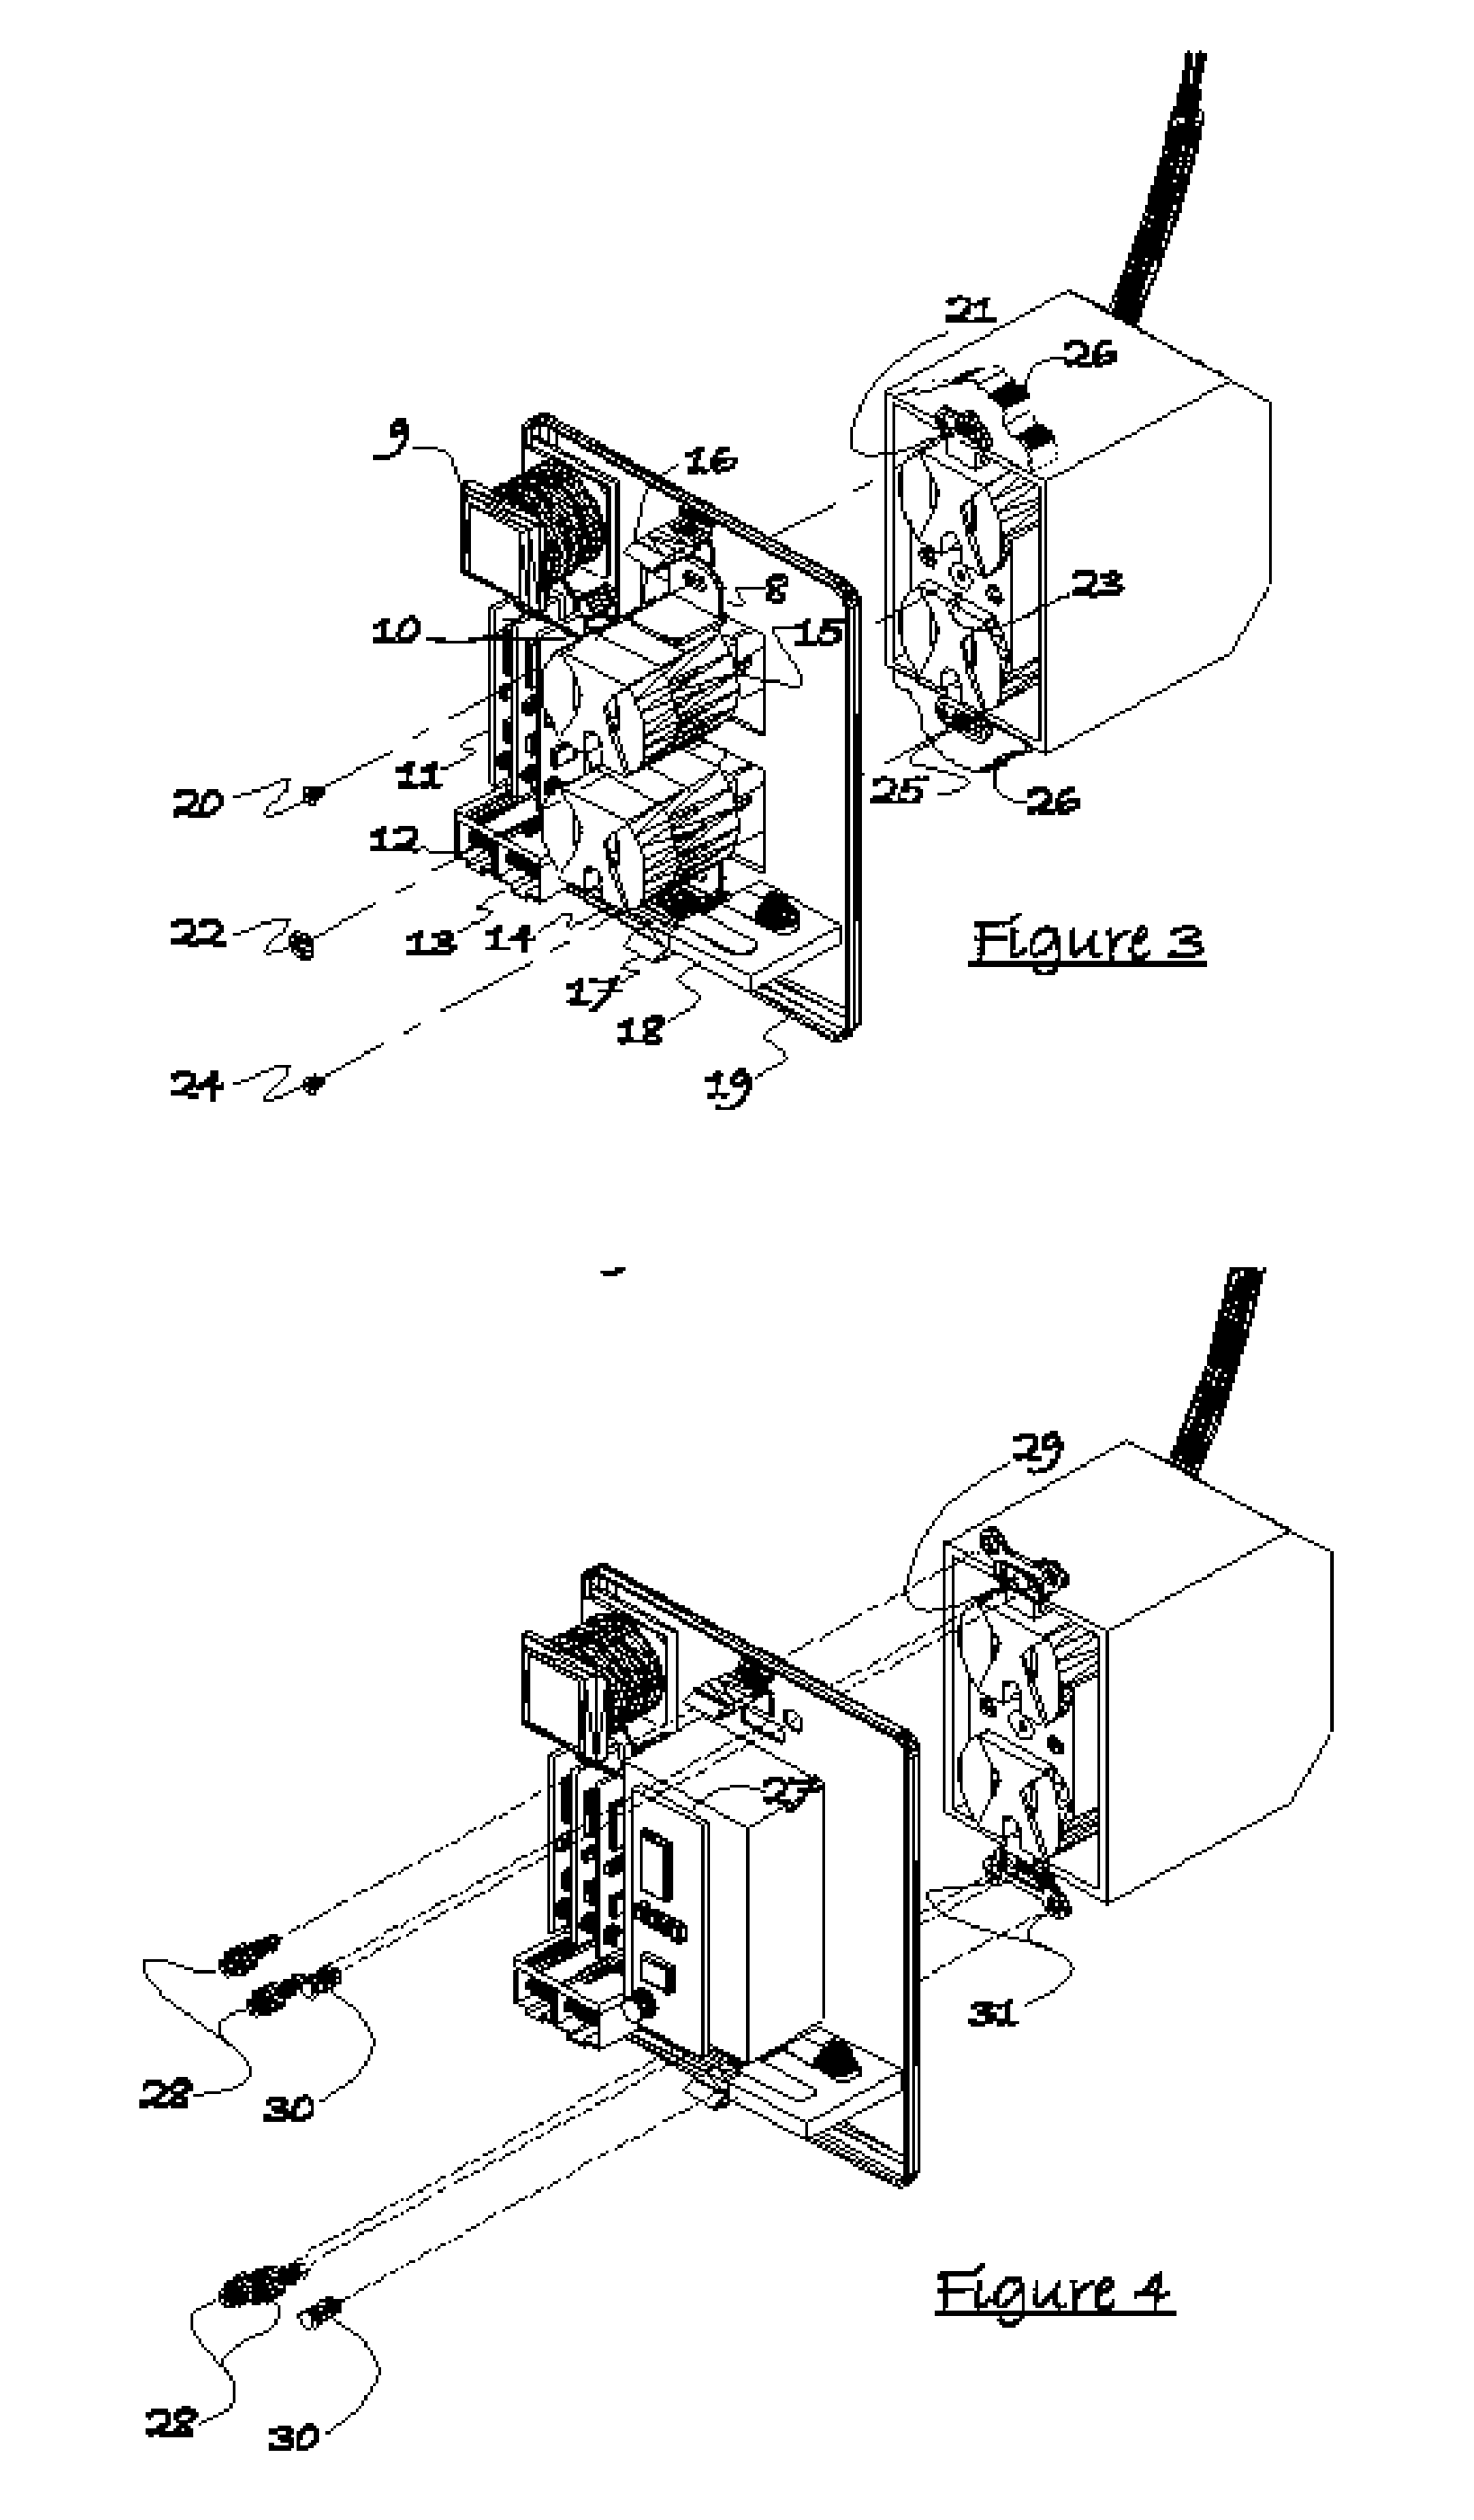 An apparatus that enables low cost installation of a secure and tamper proof assembly that accommodates lifeline support for power line communication devices.